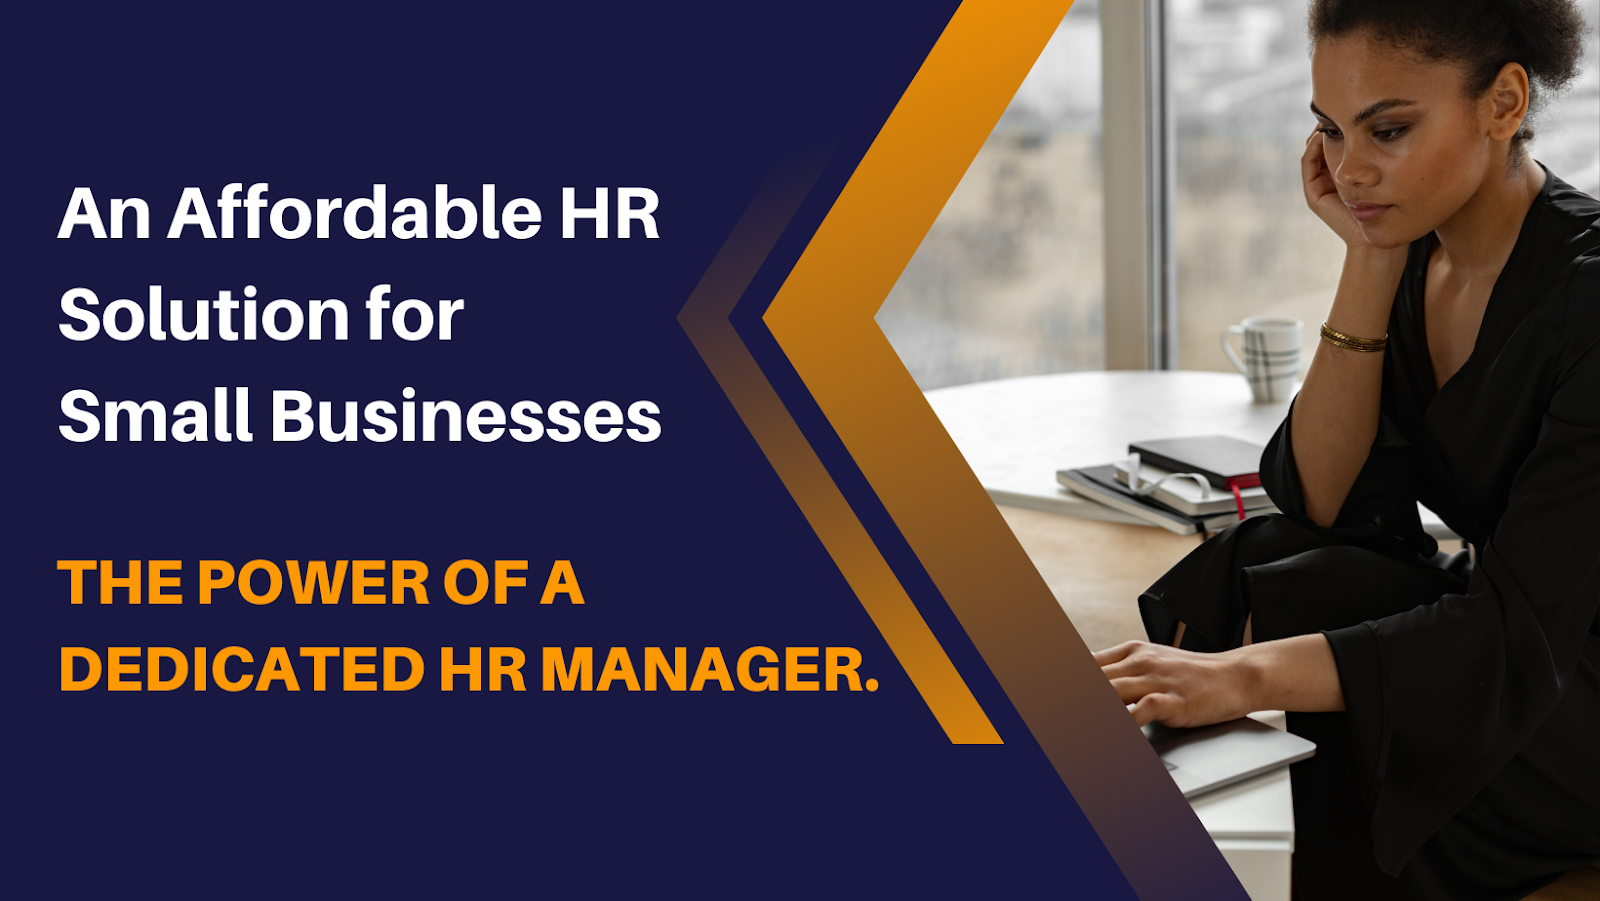 An Affordable HR Solution for Small Businesses: The Power of a Dedicated HR Manager.